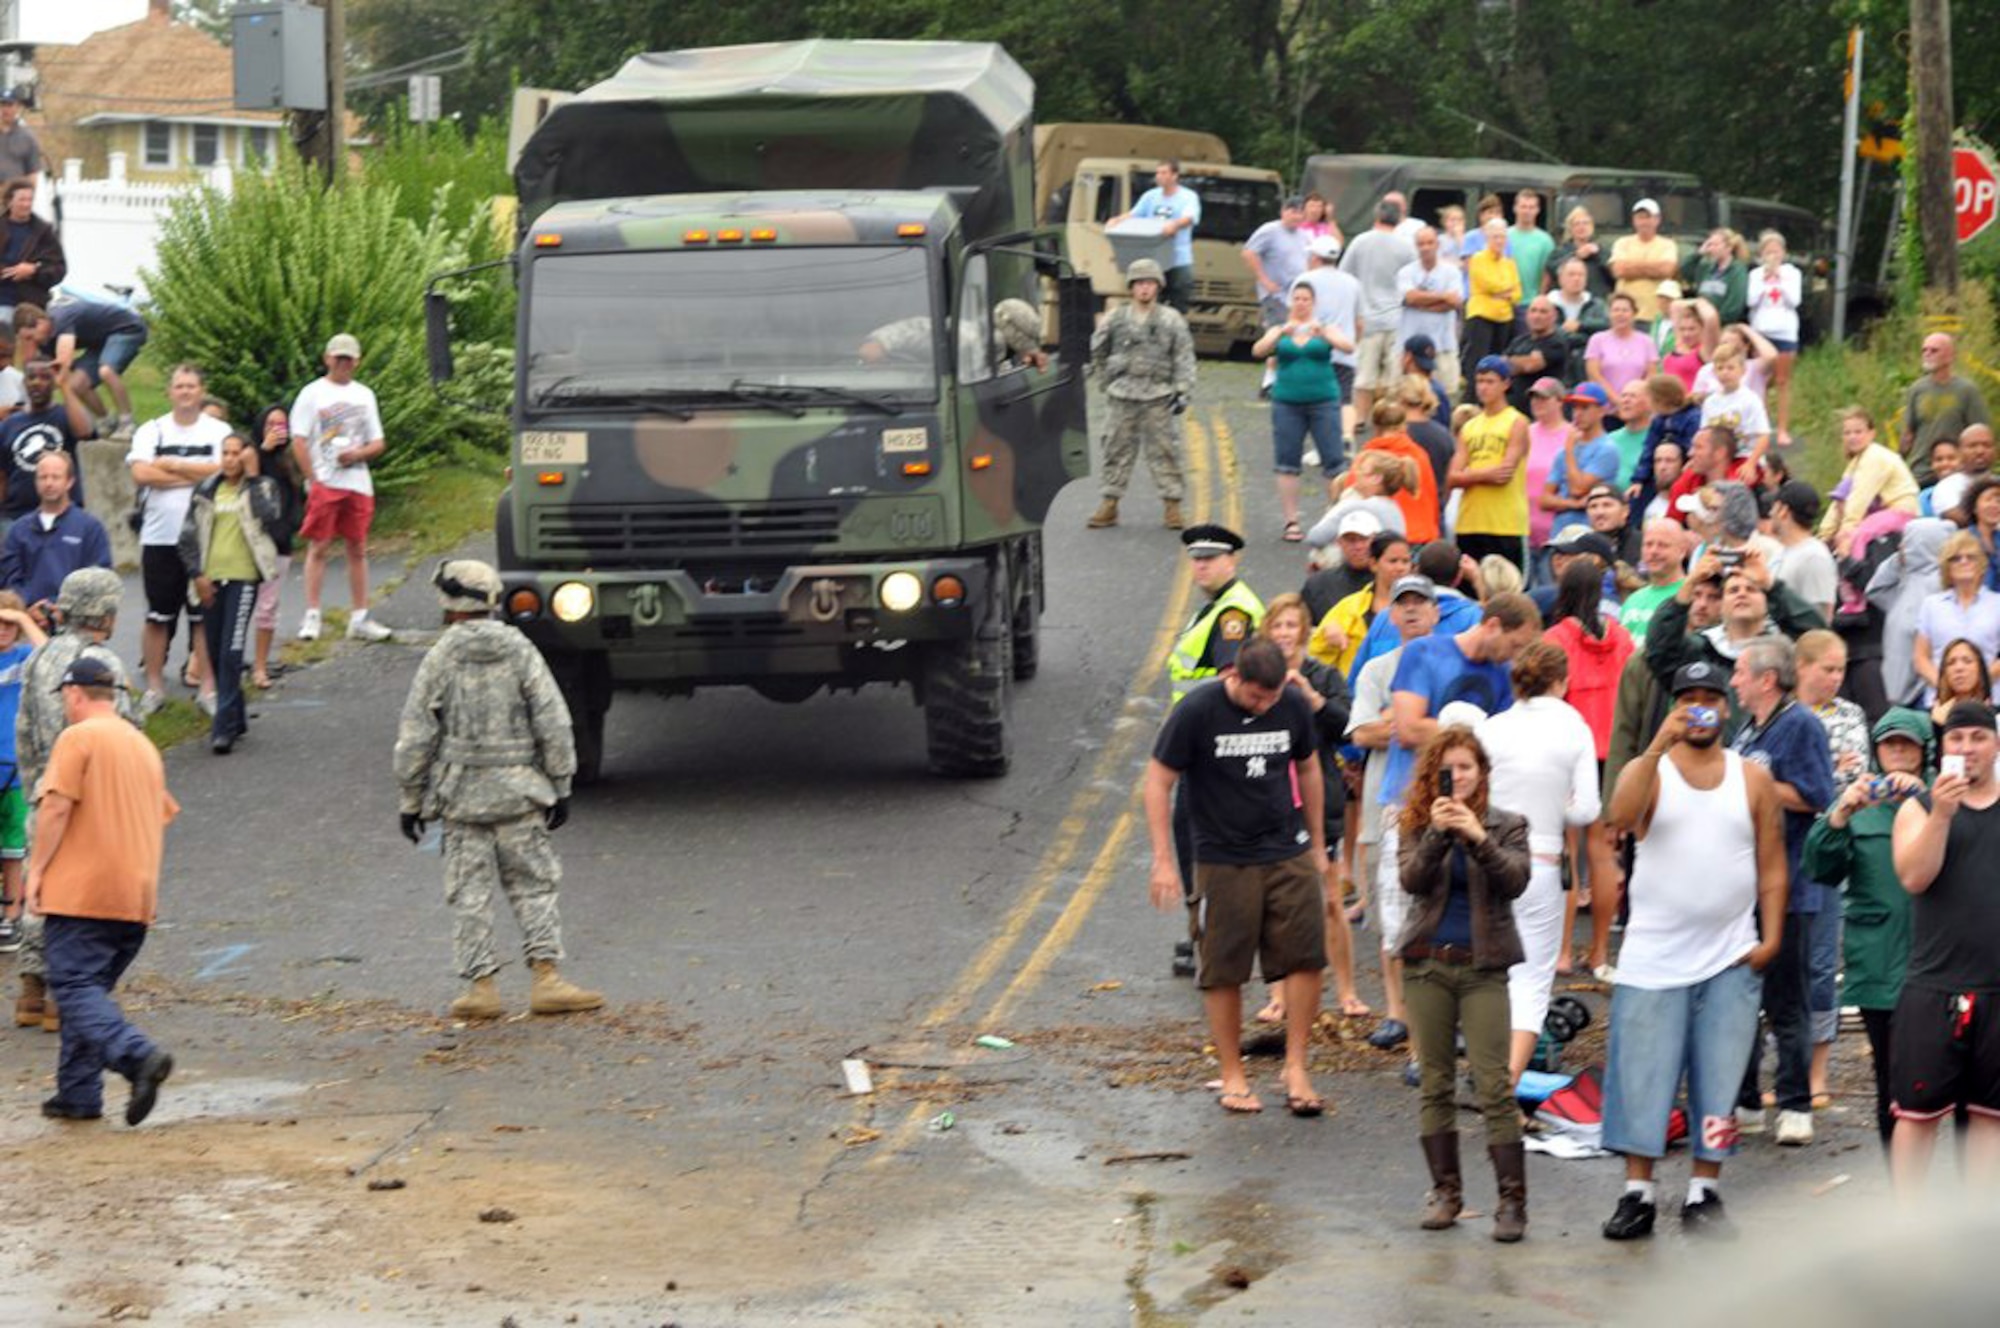 Members of the 192nd Multi-Functional Engineer Battalion, Connecticut Army National Guard guide a vehicle through the crowd looking at flooding along the shore in the aftermath of Hurricane/Tropical Storm Irene on Aug. 28, 2011. The engineers were among many Connecticut Guardsmen called out to assist local authorities before, during and after the storm battered the coastline. (U.S. Army photo by Capt. Chuck Taylor) 